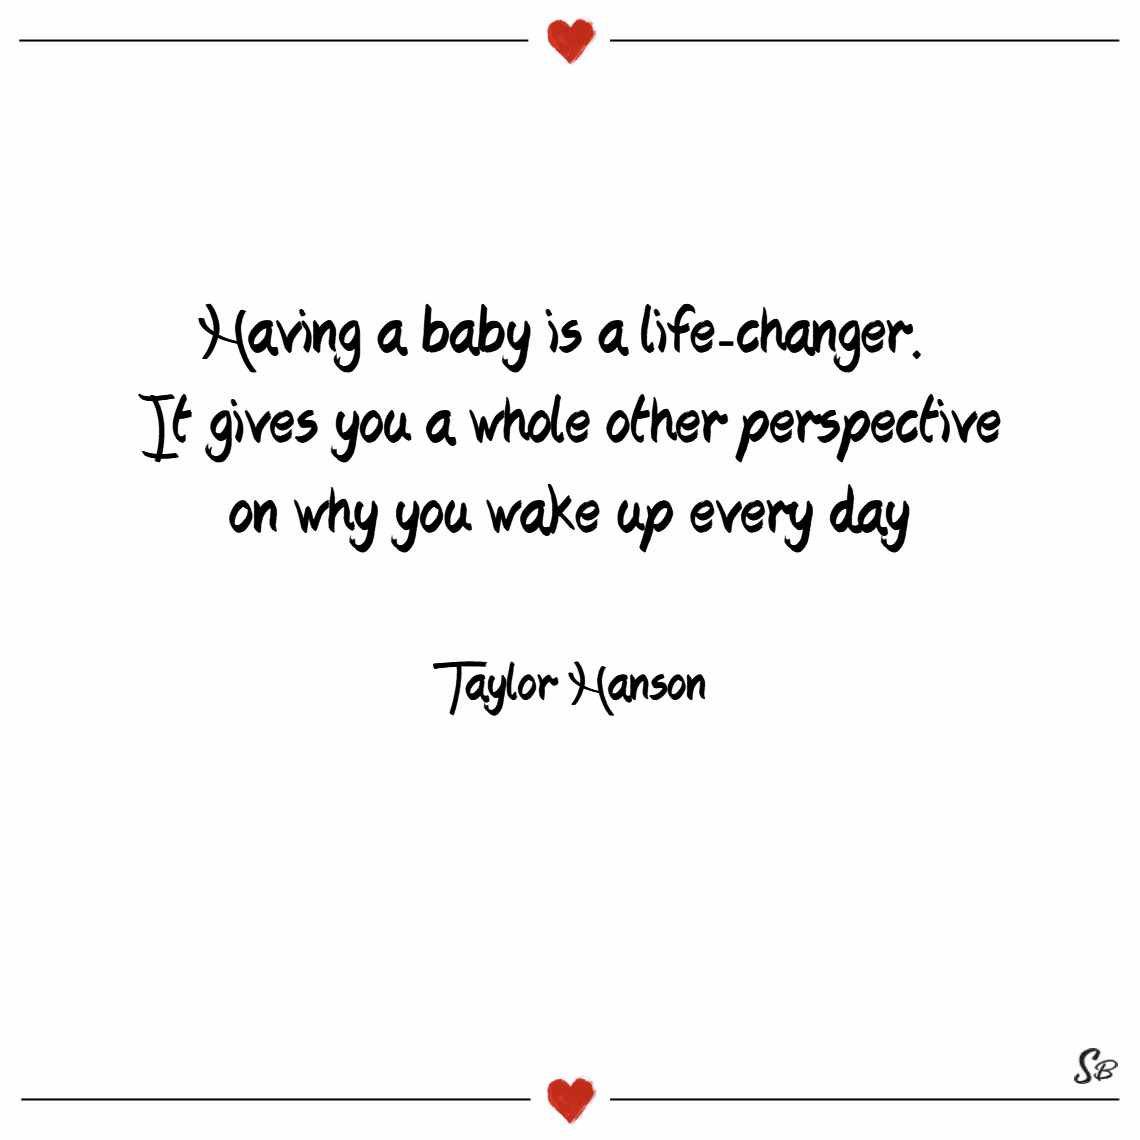 “Having a baby is a life-changer. It gives you a whole other perspective on why you wake up every day.” - Taylor Hanson